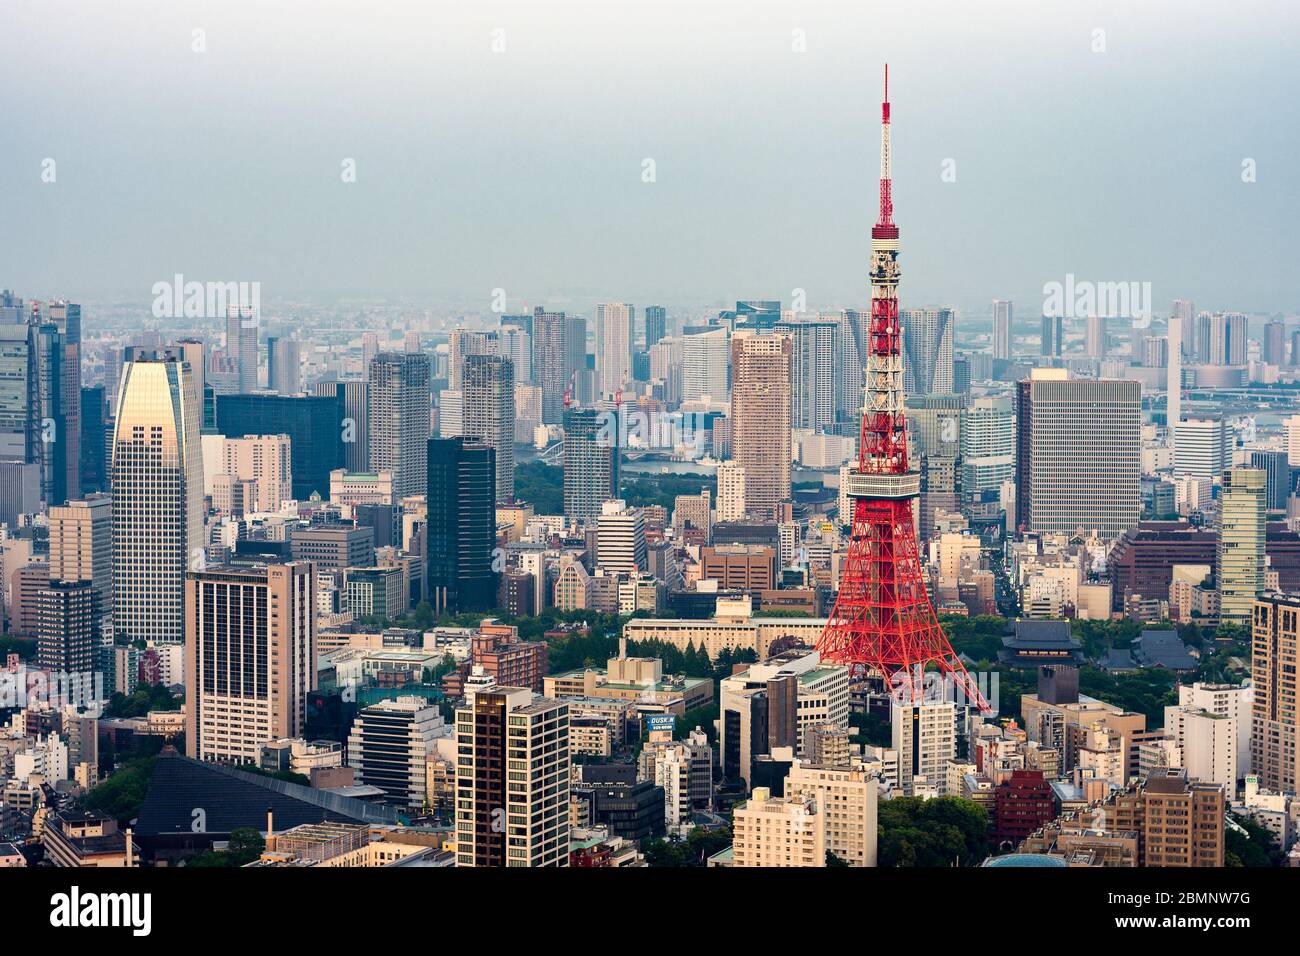 Tokyo / Japan - April 20, 2018: Tokyo Tower and Tokyo cityscape, view from the Roppongi Hills Stock Photo